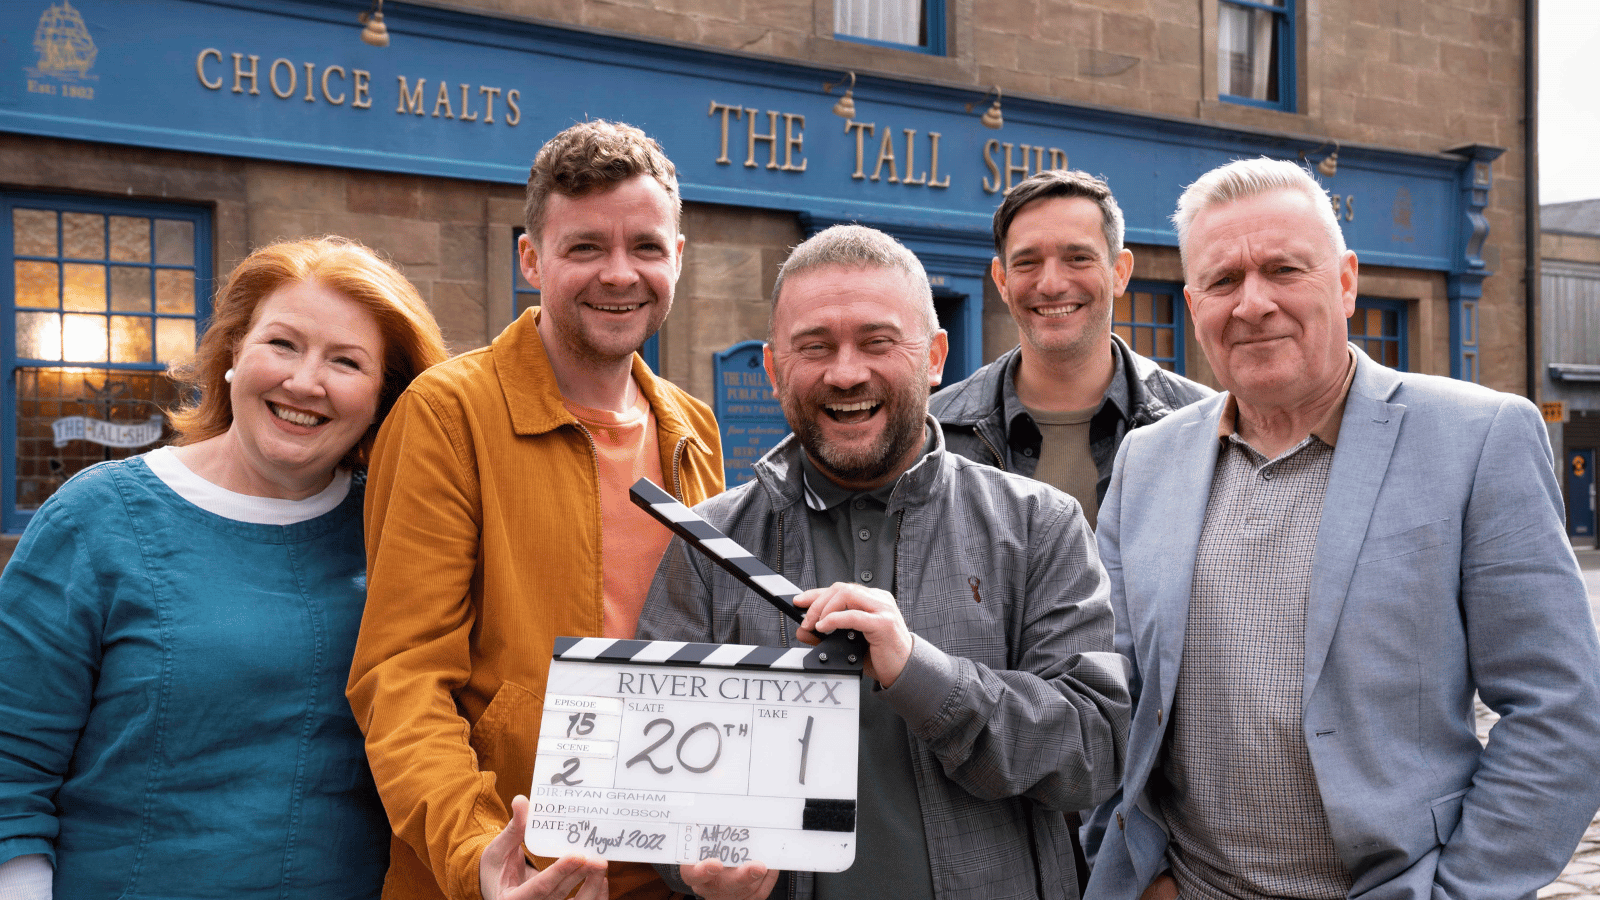 Cast of River City's 20th Episode celebrations standing on set, holding a clapper board.